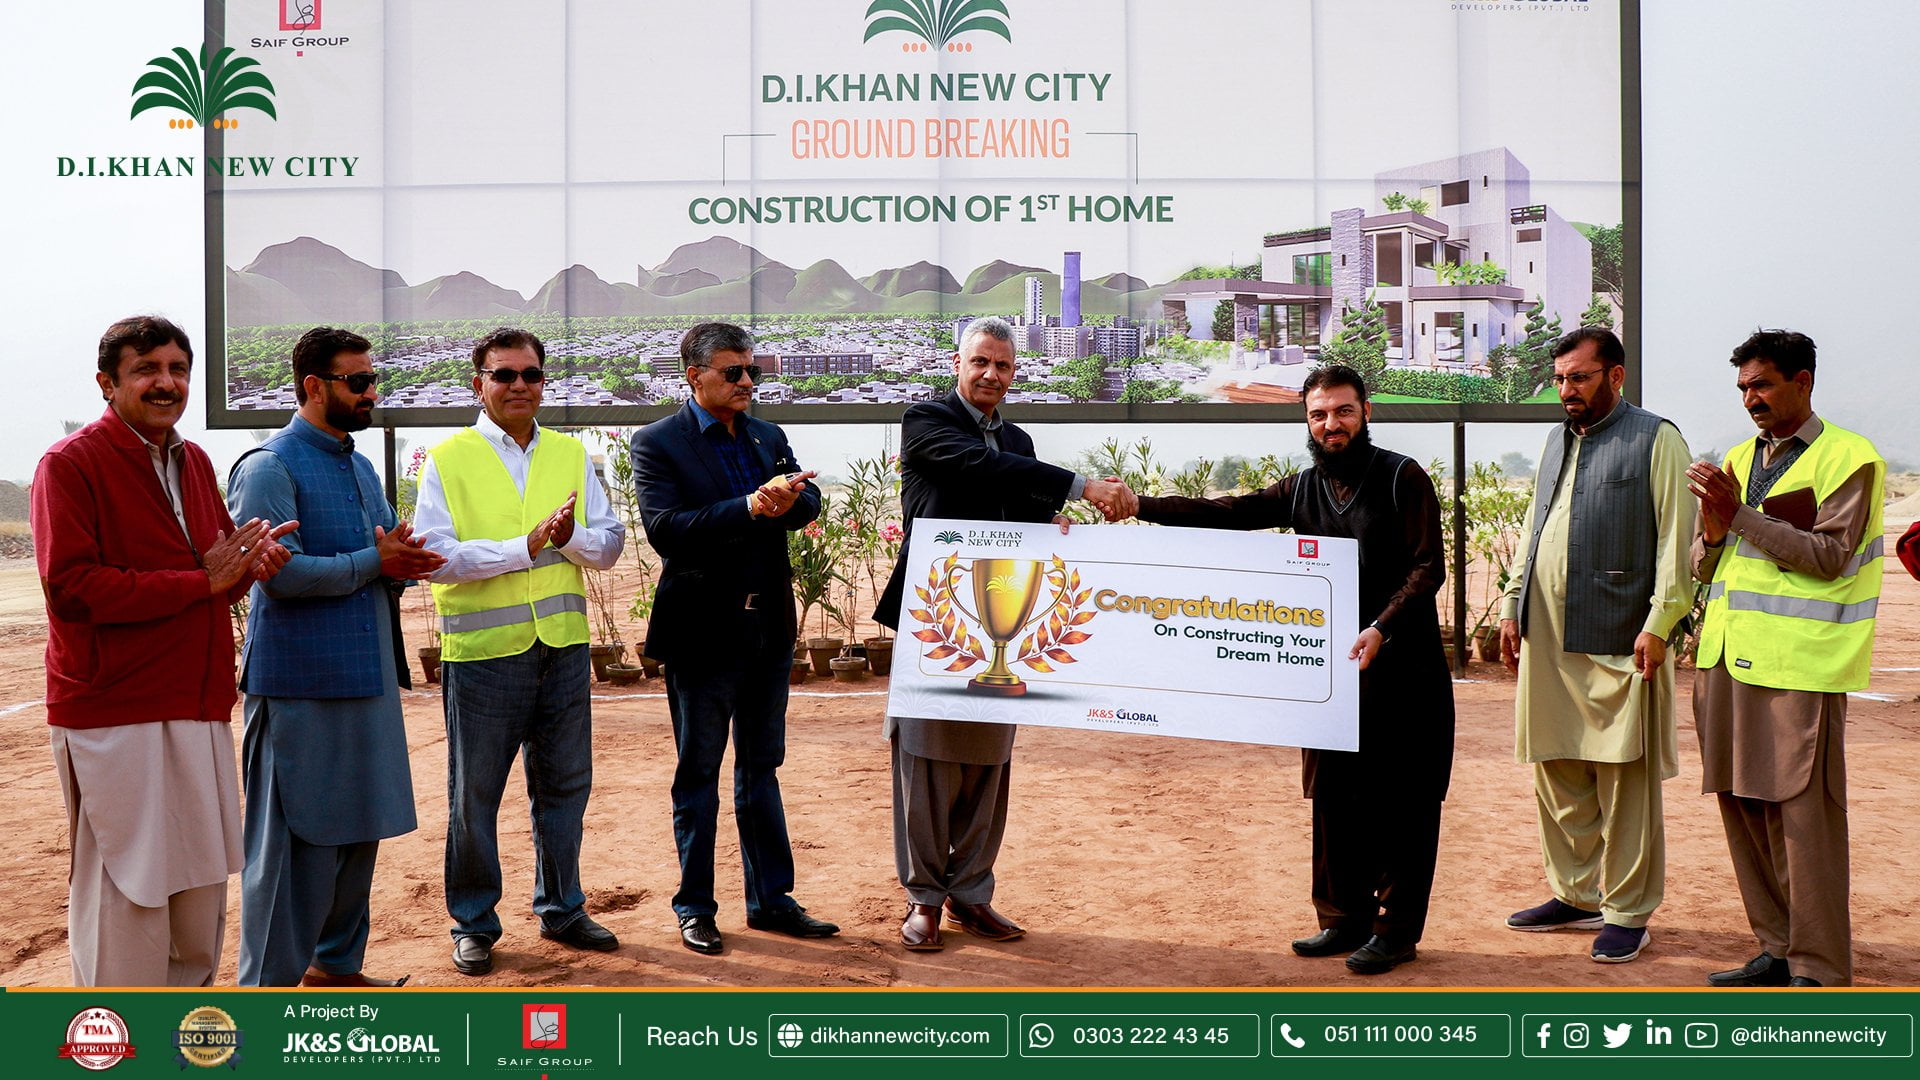 Groundbreaking of the first house in the D. I. Khan New City.